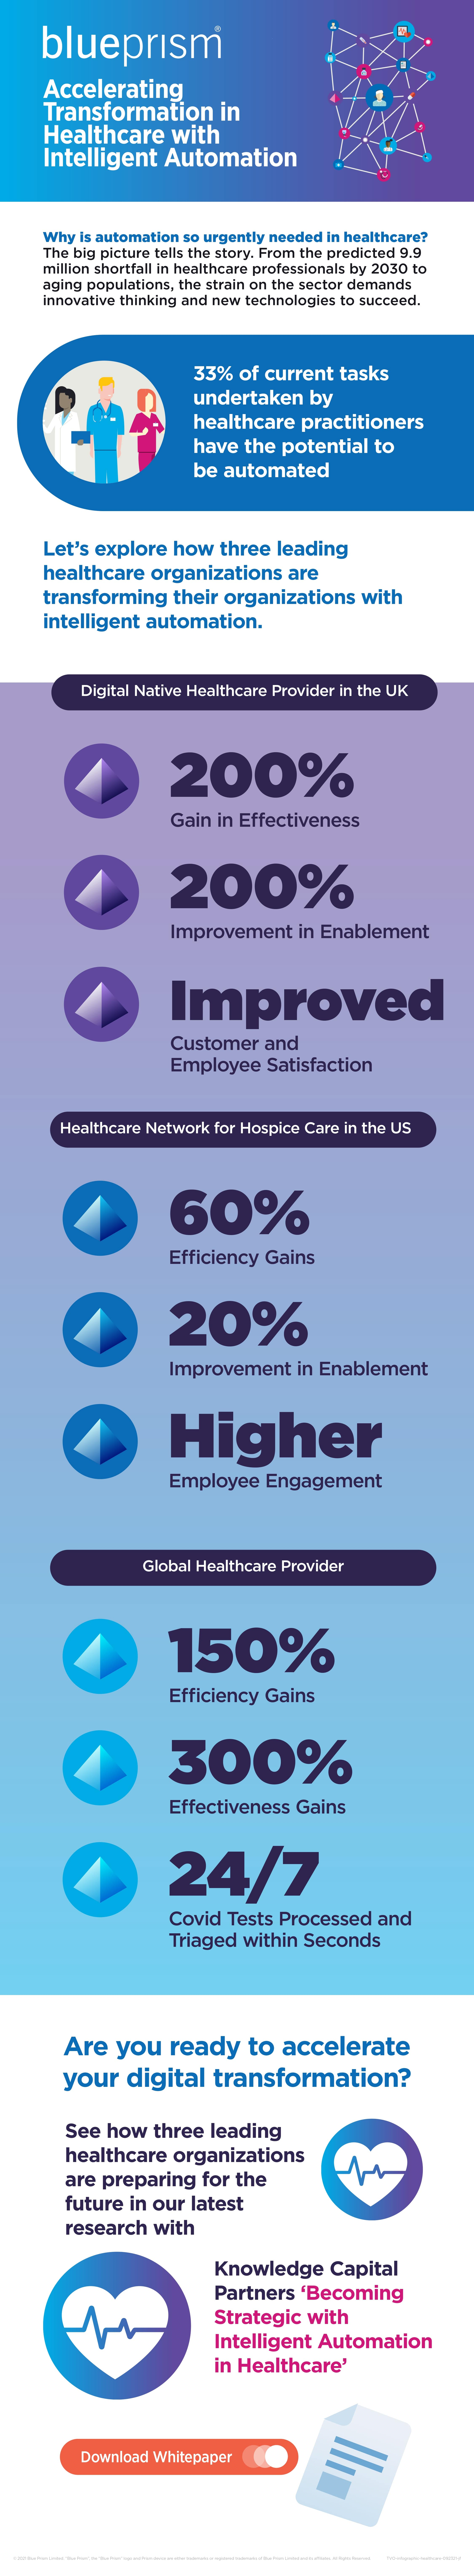 Accelerating Transformation in Healthcare with Intelligent Automation Infographic